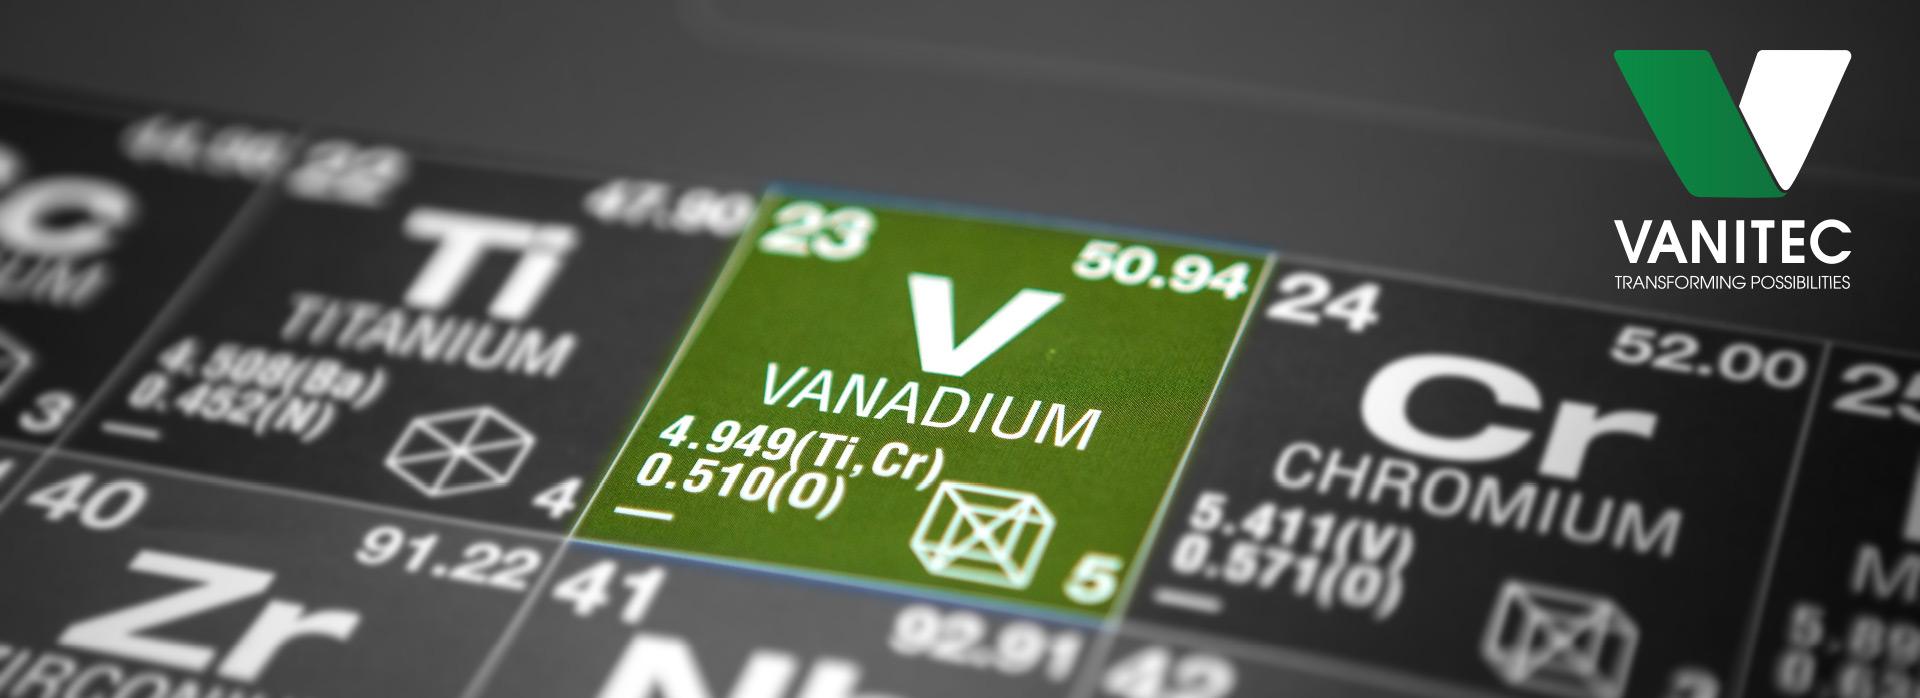 Research underway to cut cost, boost energy density of Vanadium Redox Flow Battery, inventor says - Lifa Communications